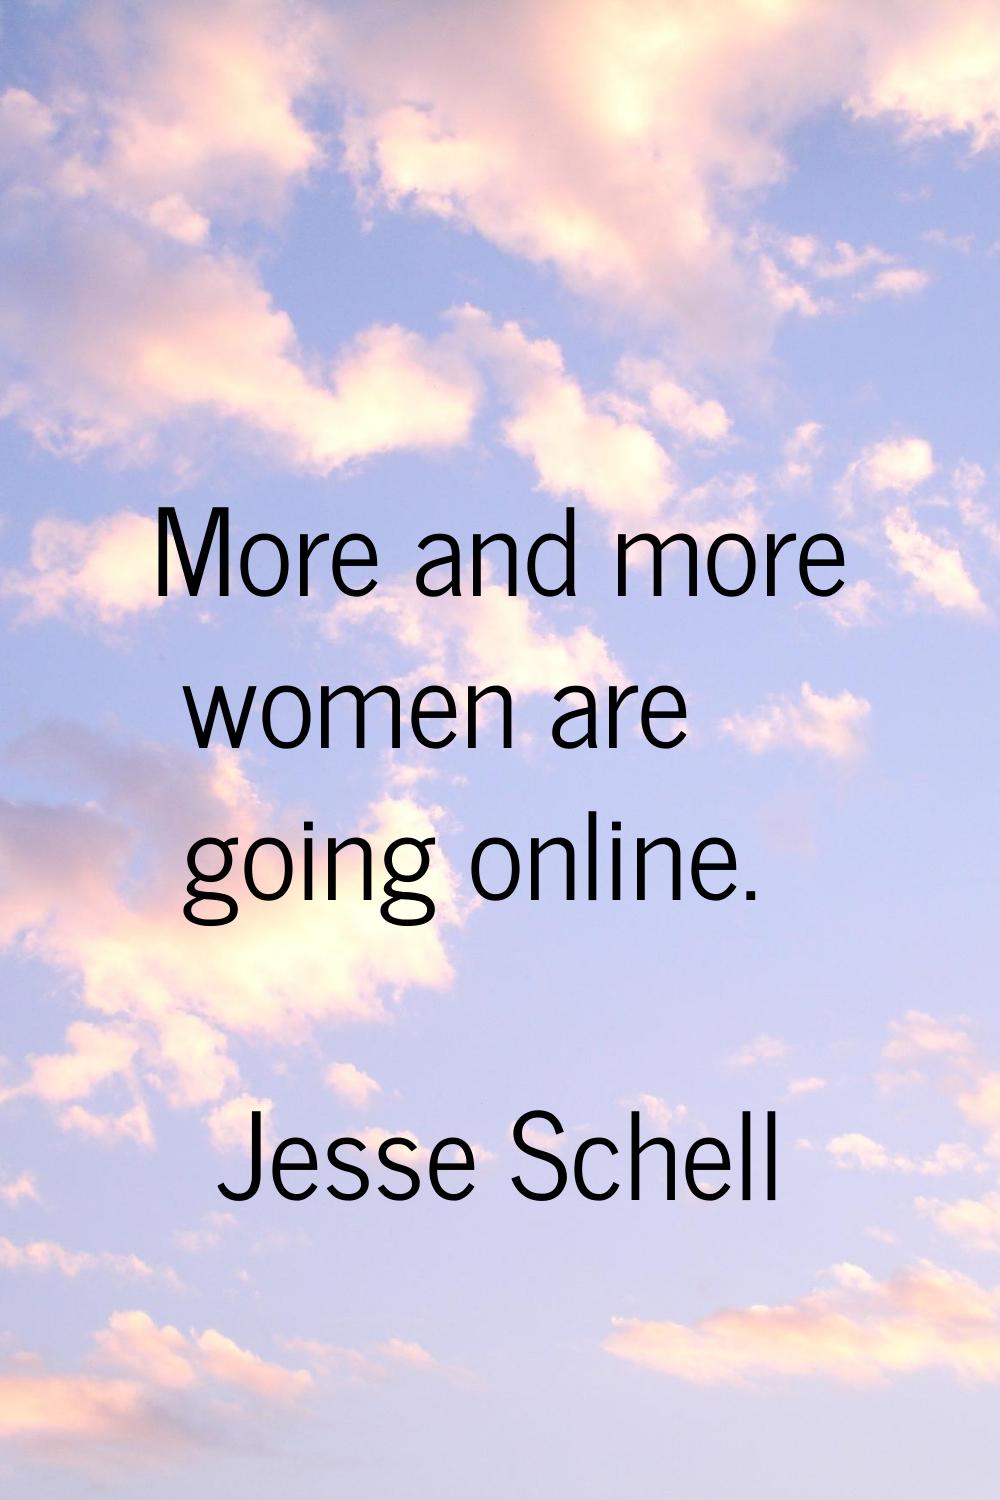 More and more women are going online.